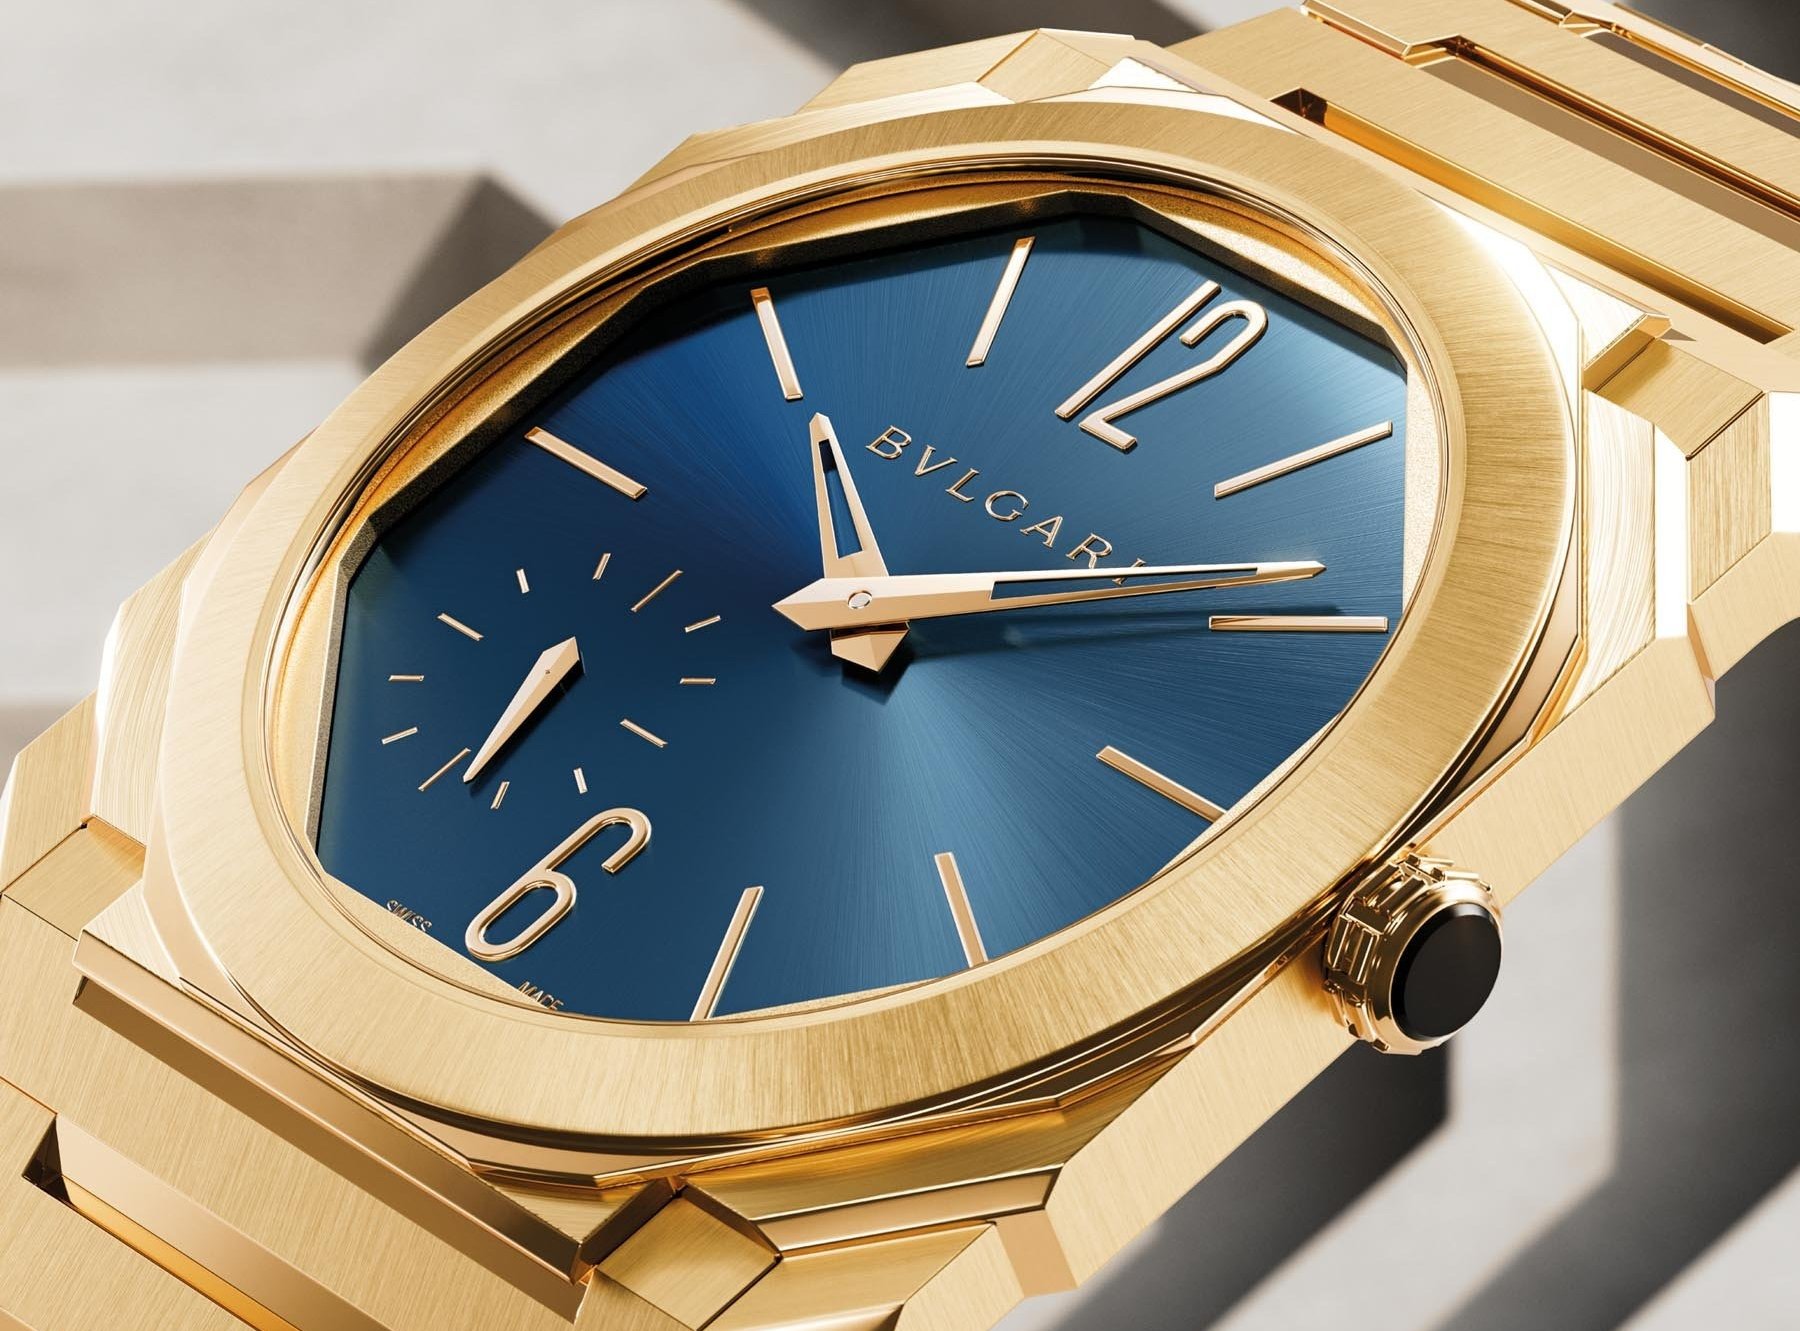 Bvlgari Launches Two Octo Finissimo Models At LVMH Watch Week — One In Yellow Gold, The Other In 904L Steel